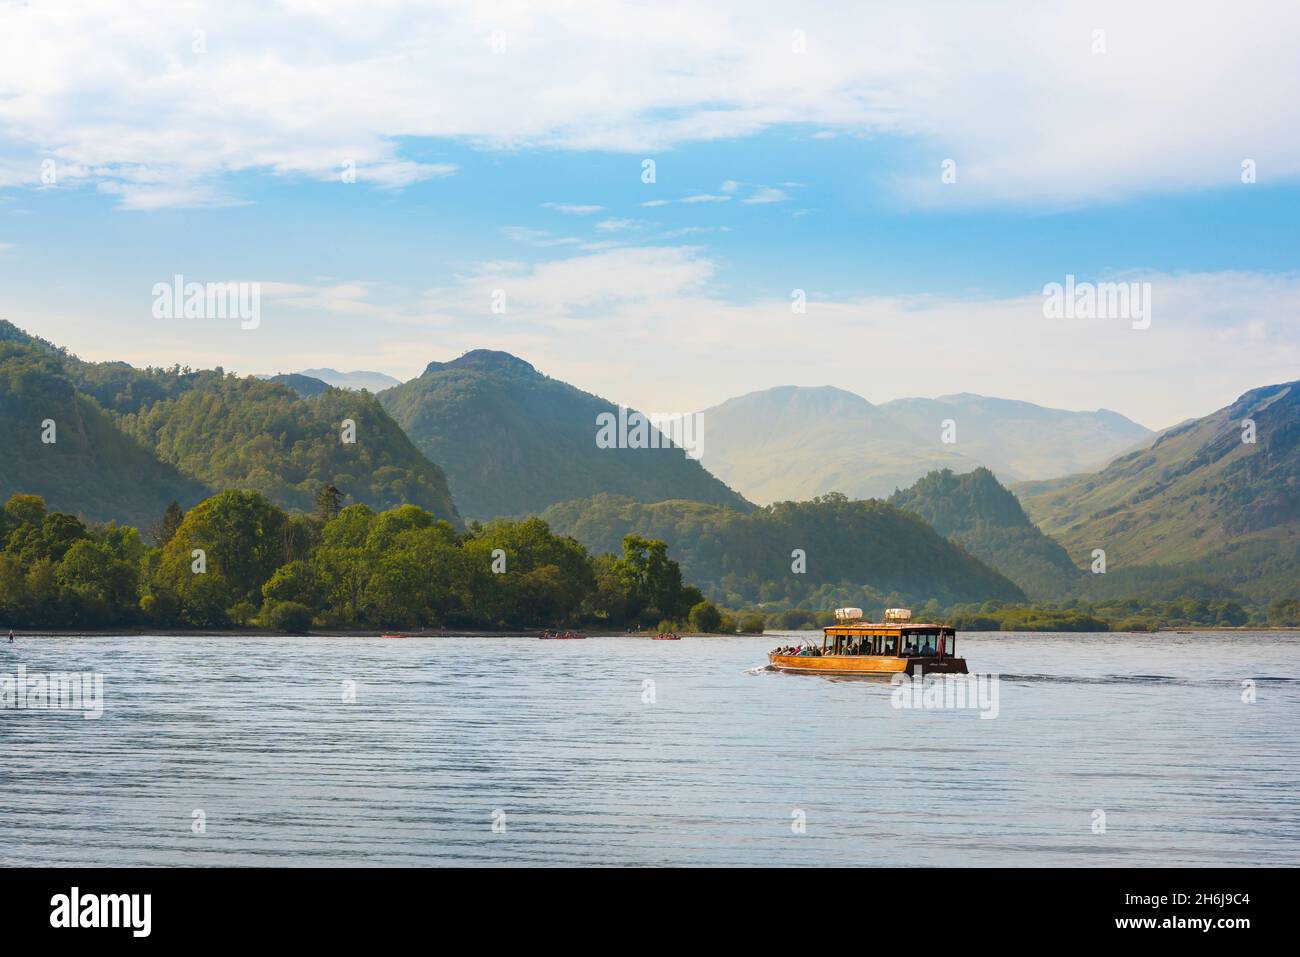 Derwent Water, view on a summer morning of a ferry boat cruising Derwent Water with a view of Borrowdale High Fells in the distance, Lake District, UK Stock Photo